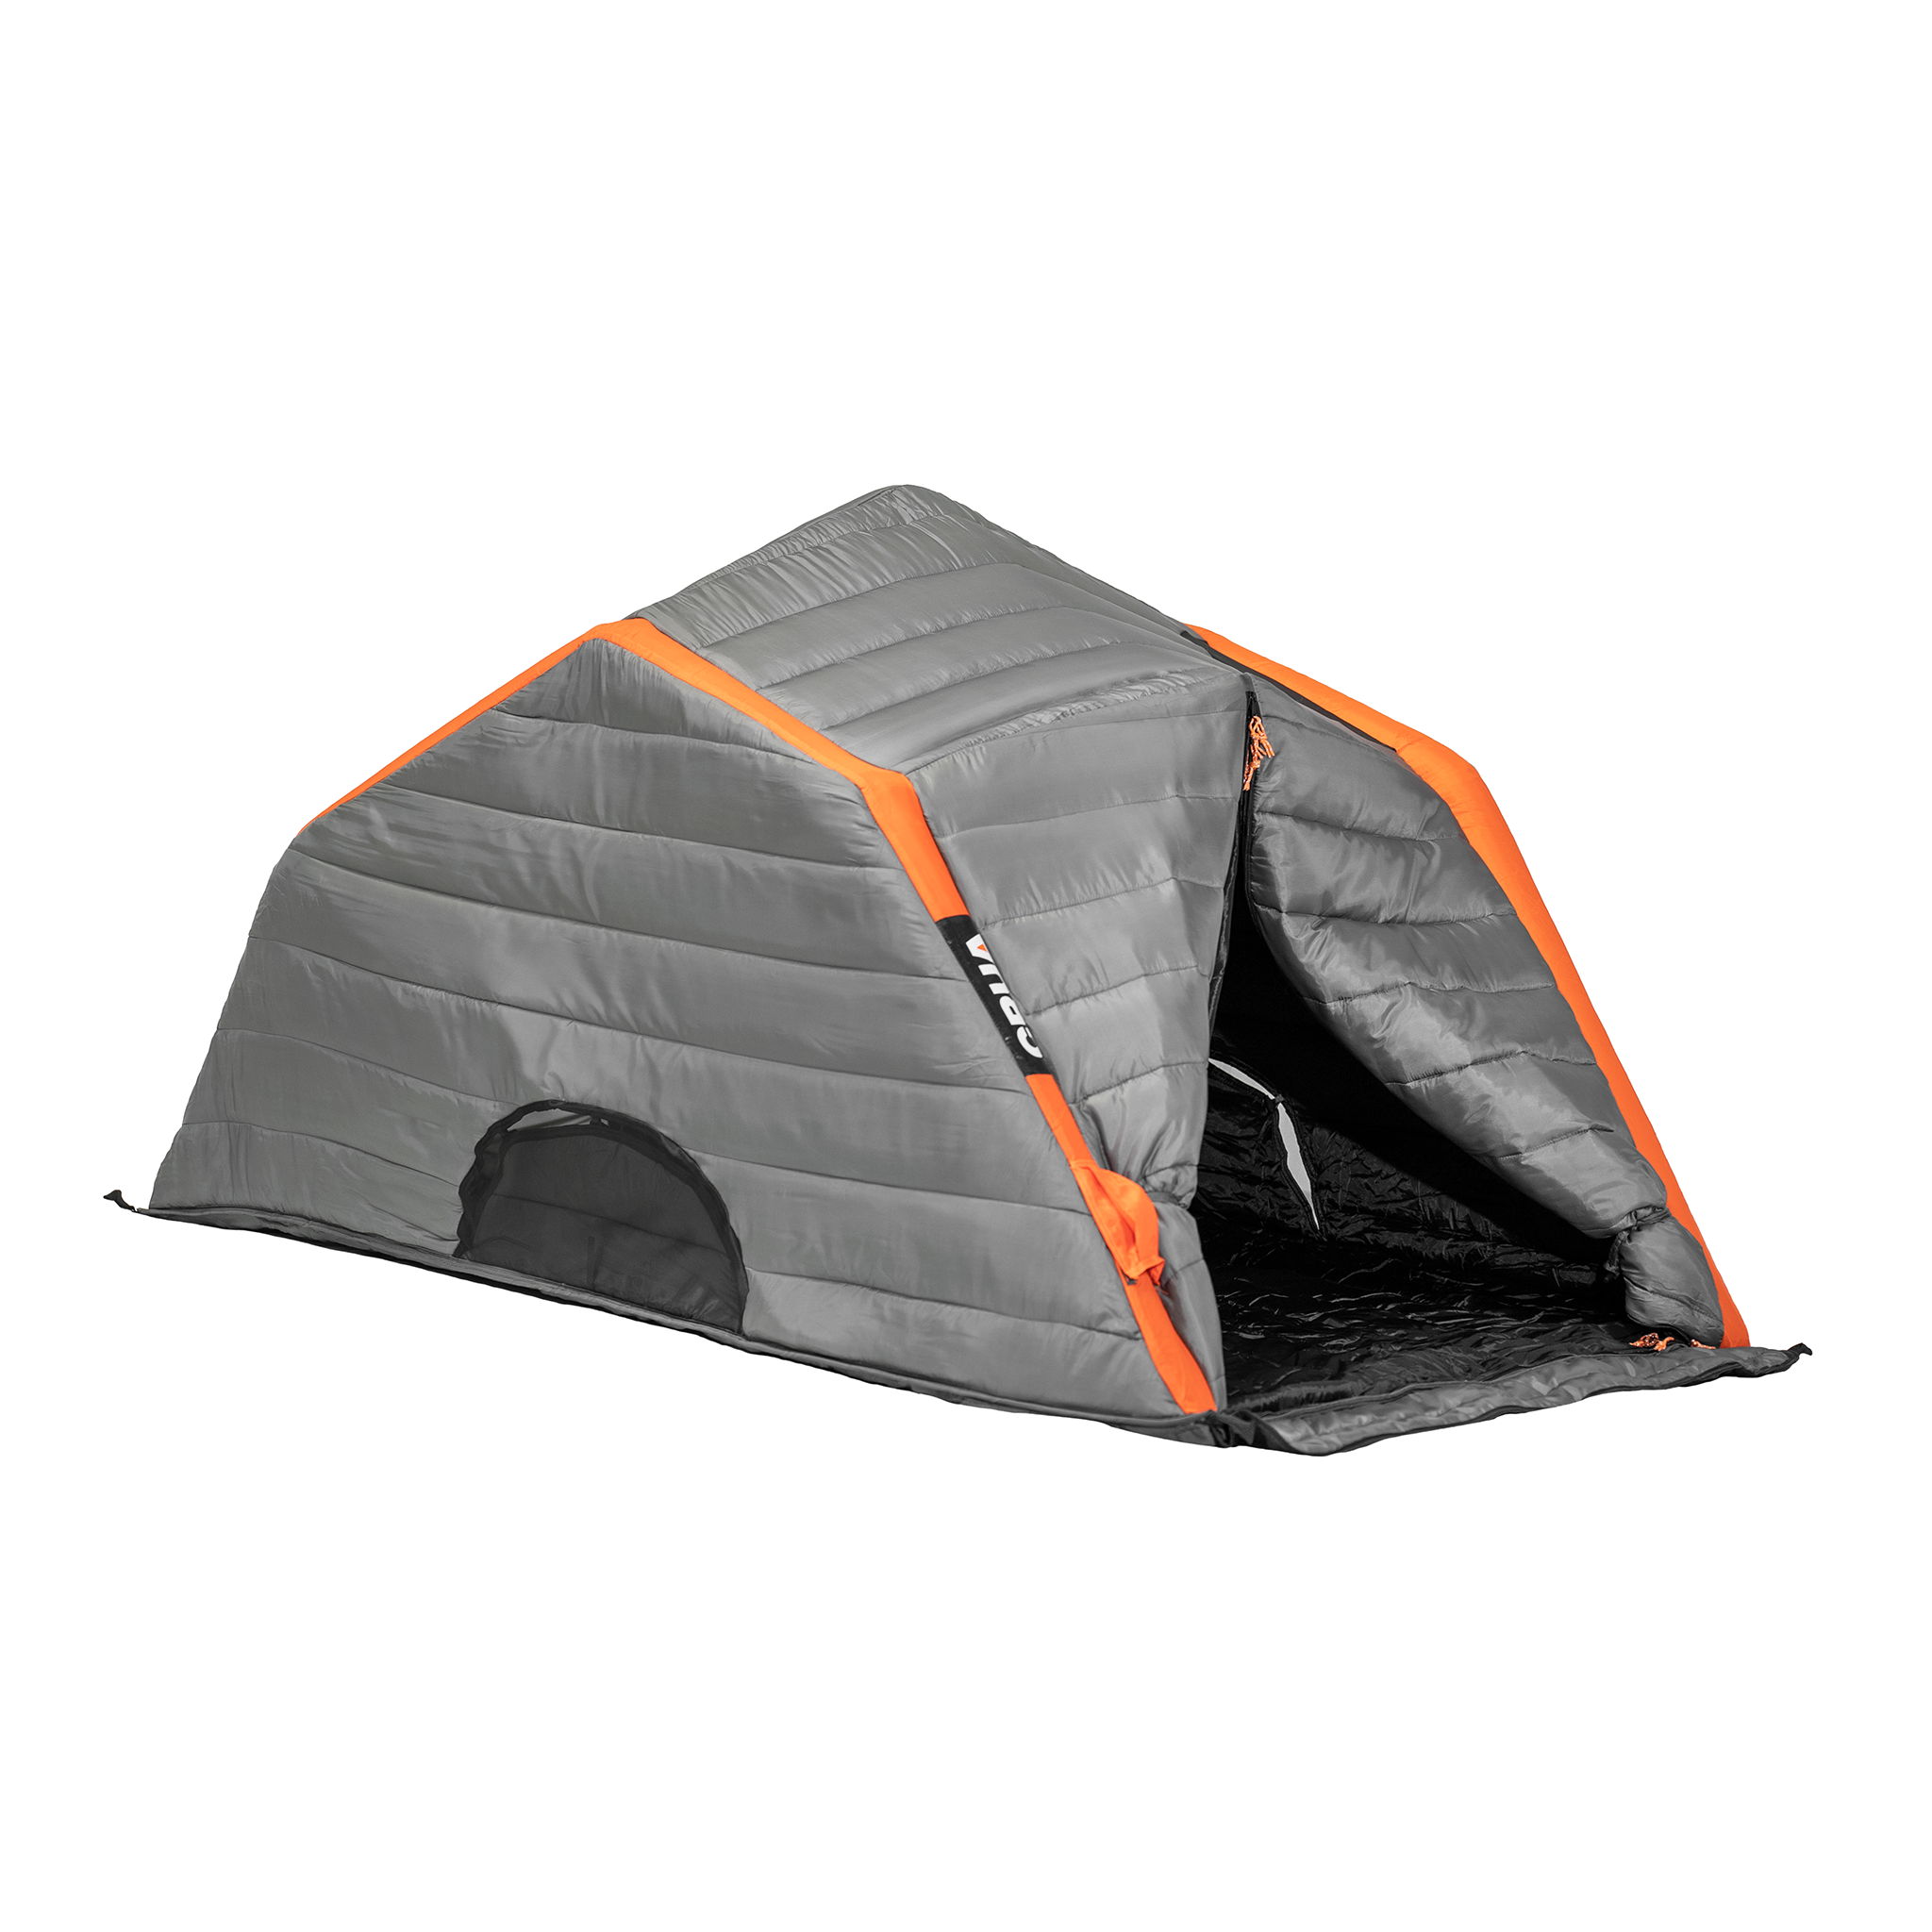  Crua Culla Haul - Rooftop Tent Inner Insulated Lining